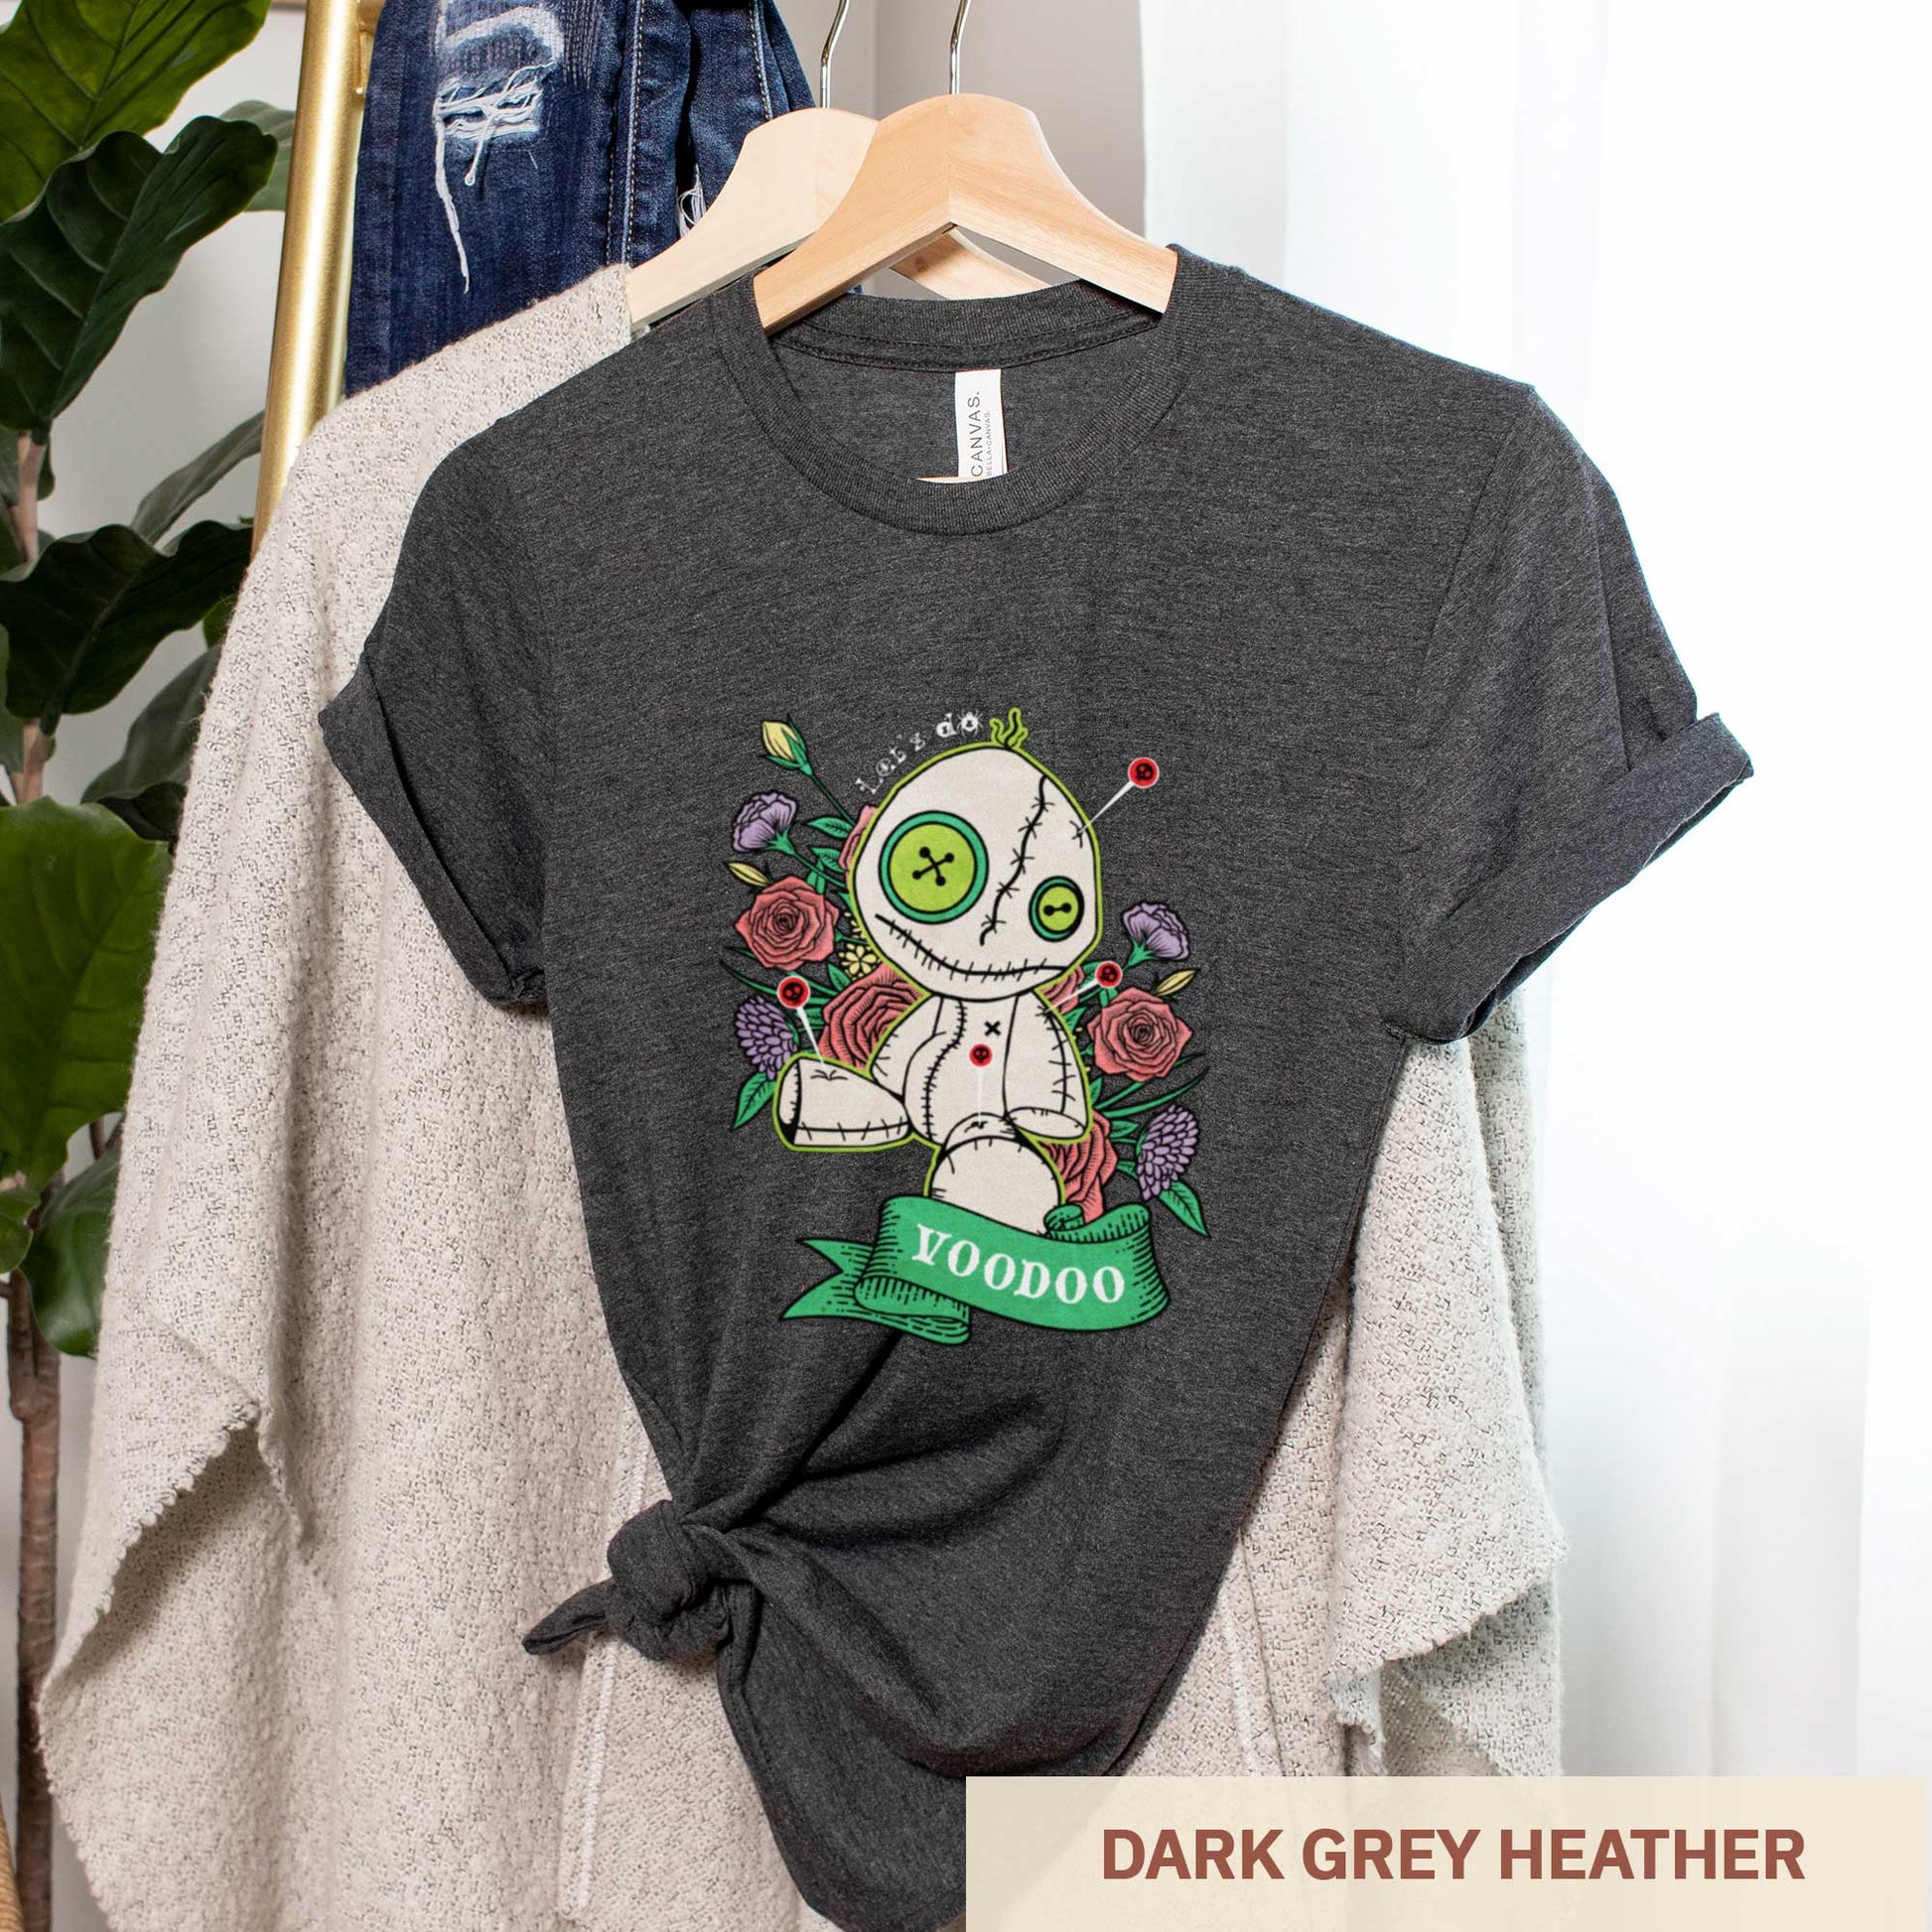 A dark grey heather Bella Canvas t-shirt featuring a cartoon voodoo doll and flowers.